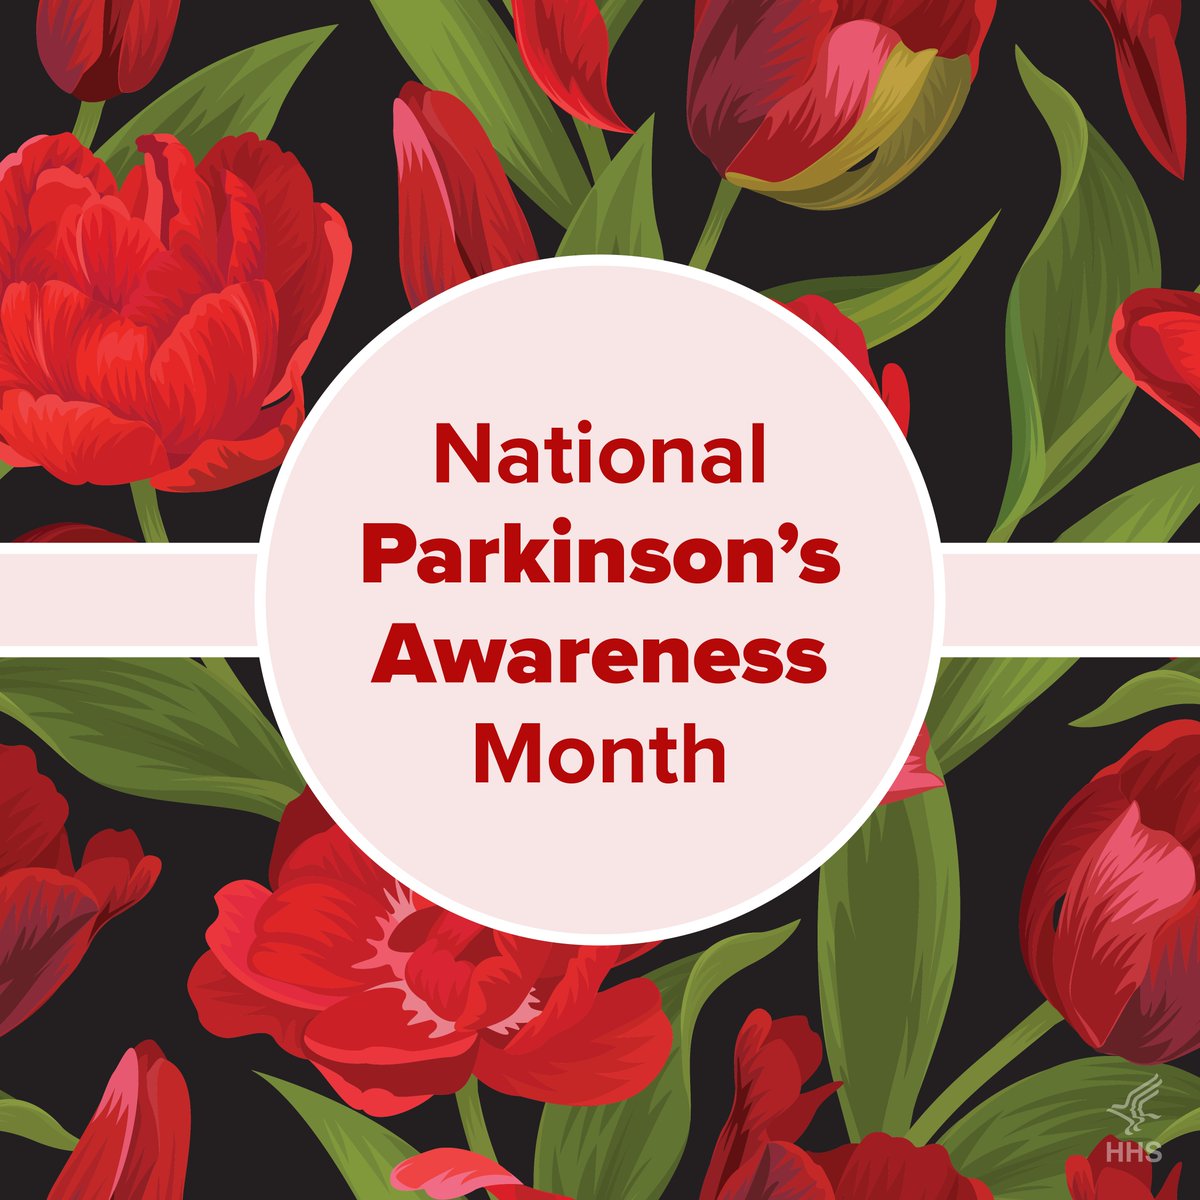 Parkinson's can take the form of shaking, stiffness, or difficulty with balance. Medication, physical therapy, and speech therapy can be used to lessen the effects. During National Parkinson's Awareness Month, we spread hope to those struggling. 🌷 More: bit.ly/3VSAVe9.